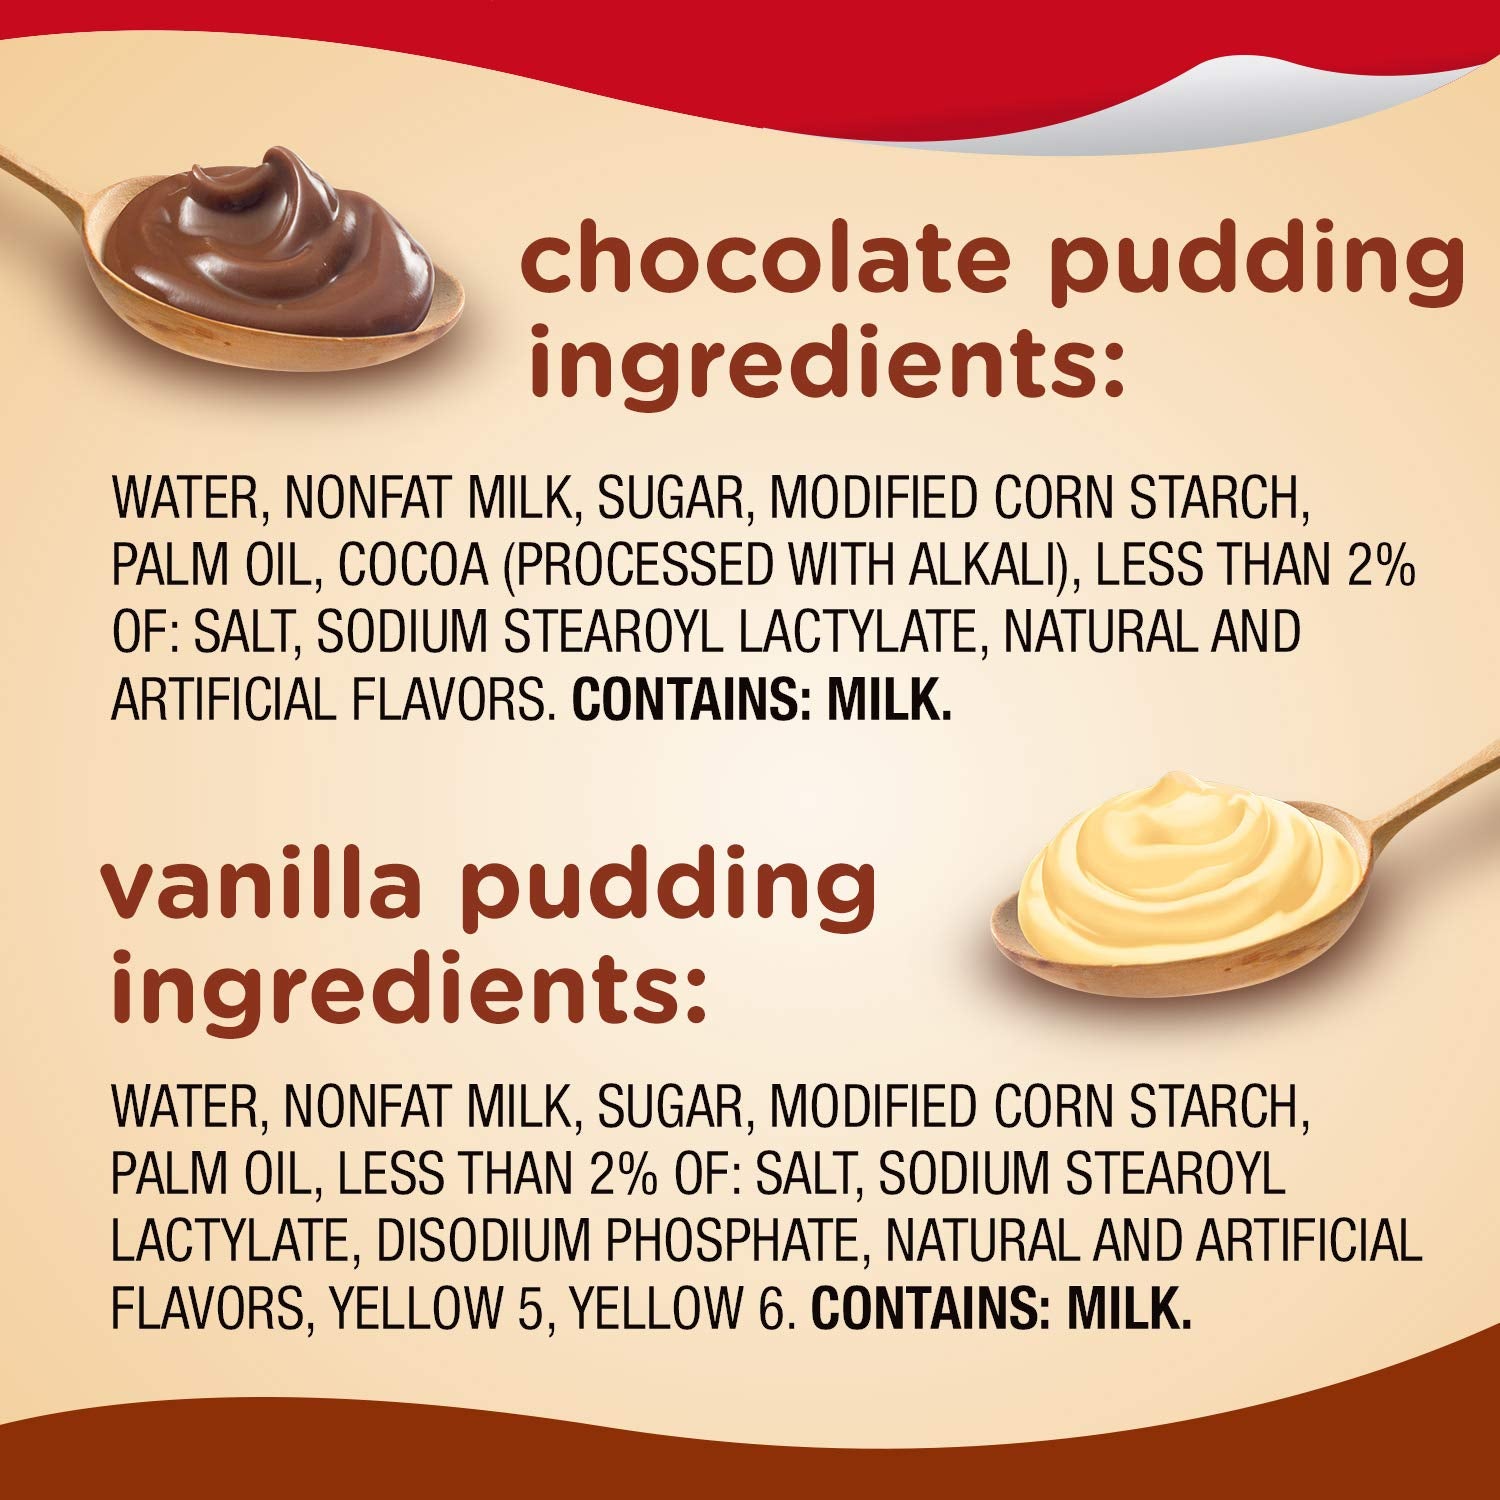 Snack Pack Chocolate and Vanilla Flavored Pudding Cups Family Pack, 12 Count Pudding Cups